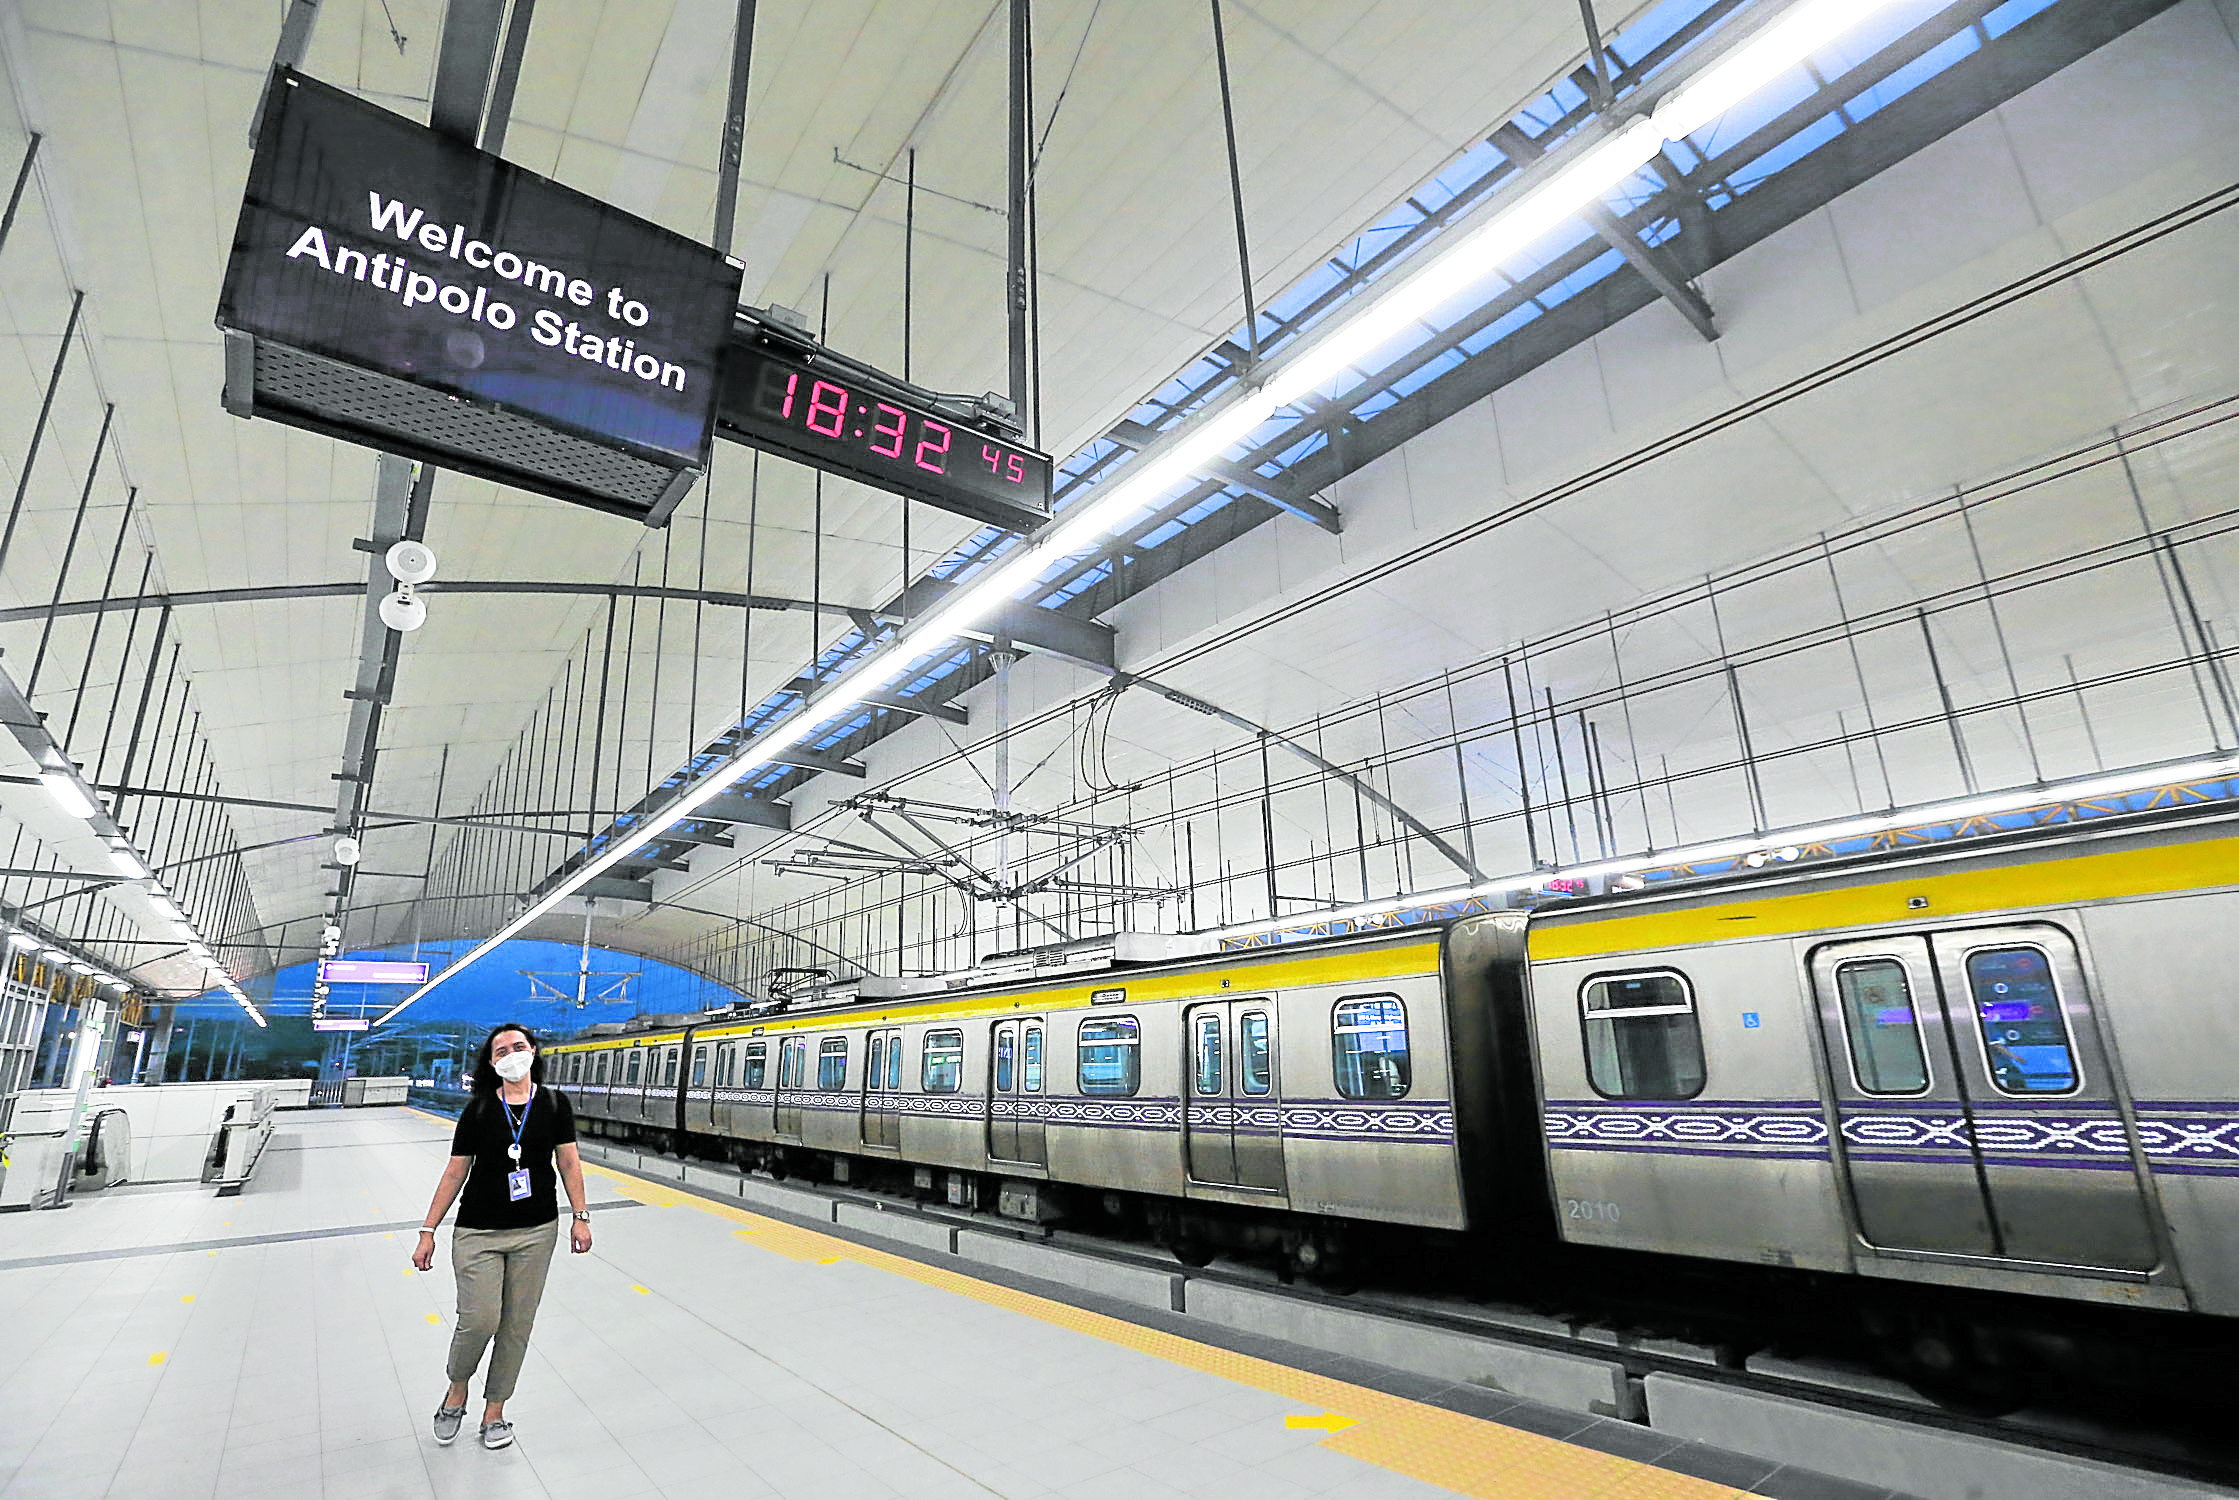 OPERATIONAL President Duterte and transportation officials inaugurated on Thursday the Antipolo (in picture) and Marikina stations of the Light Rail Transit Line 2. —LYN RILLON